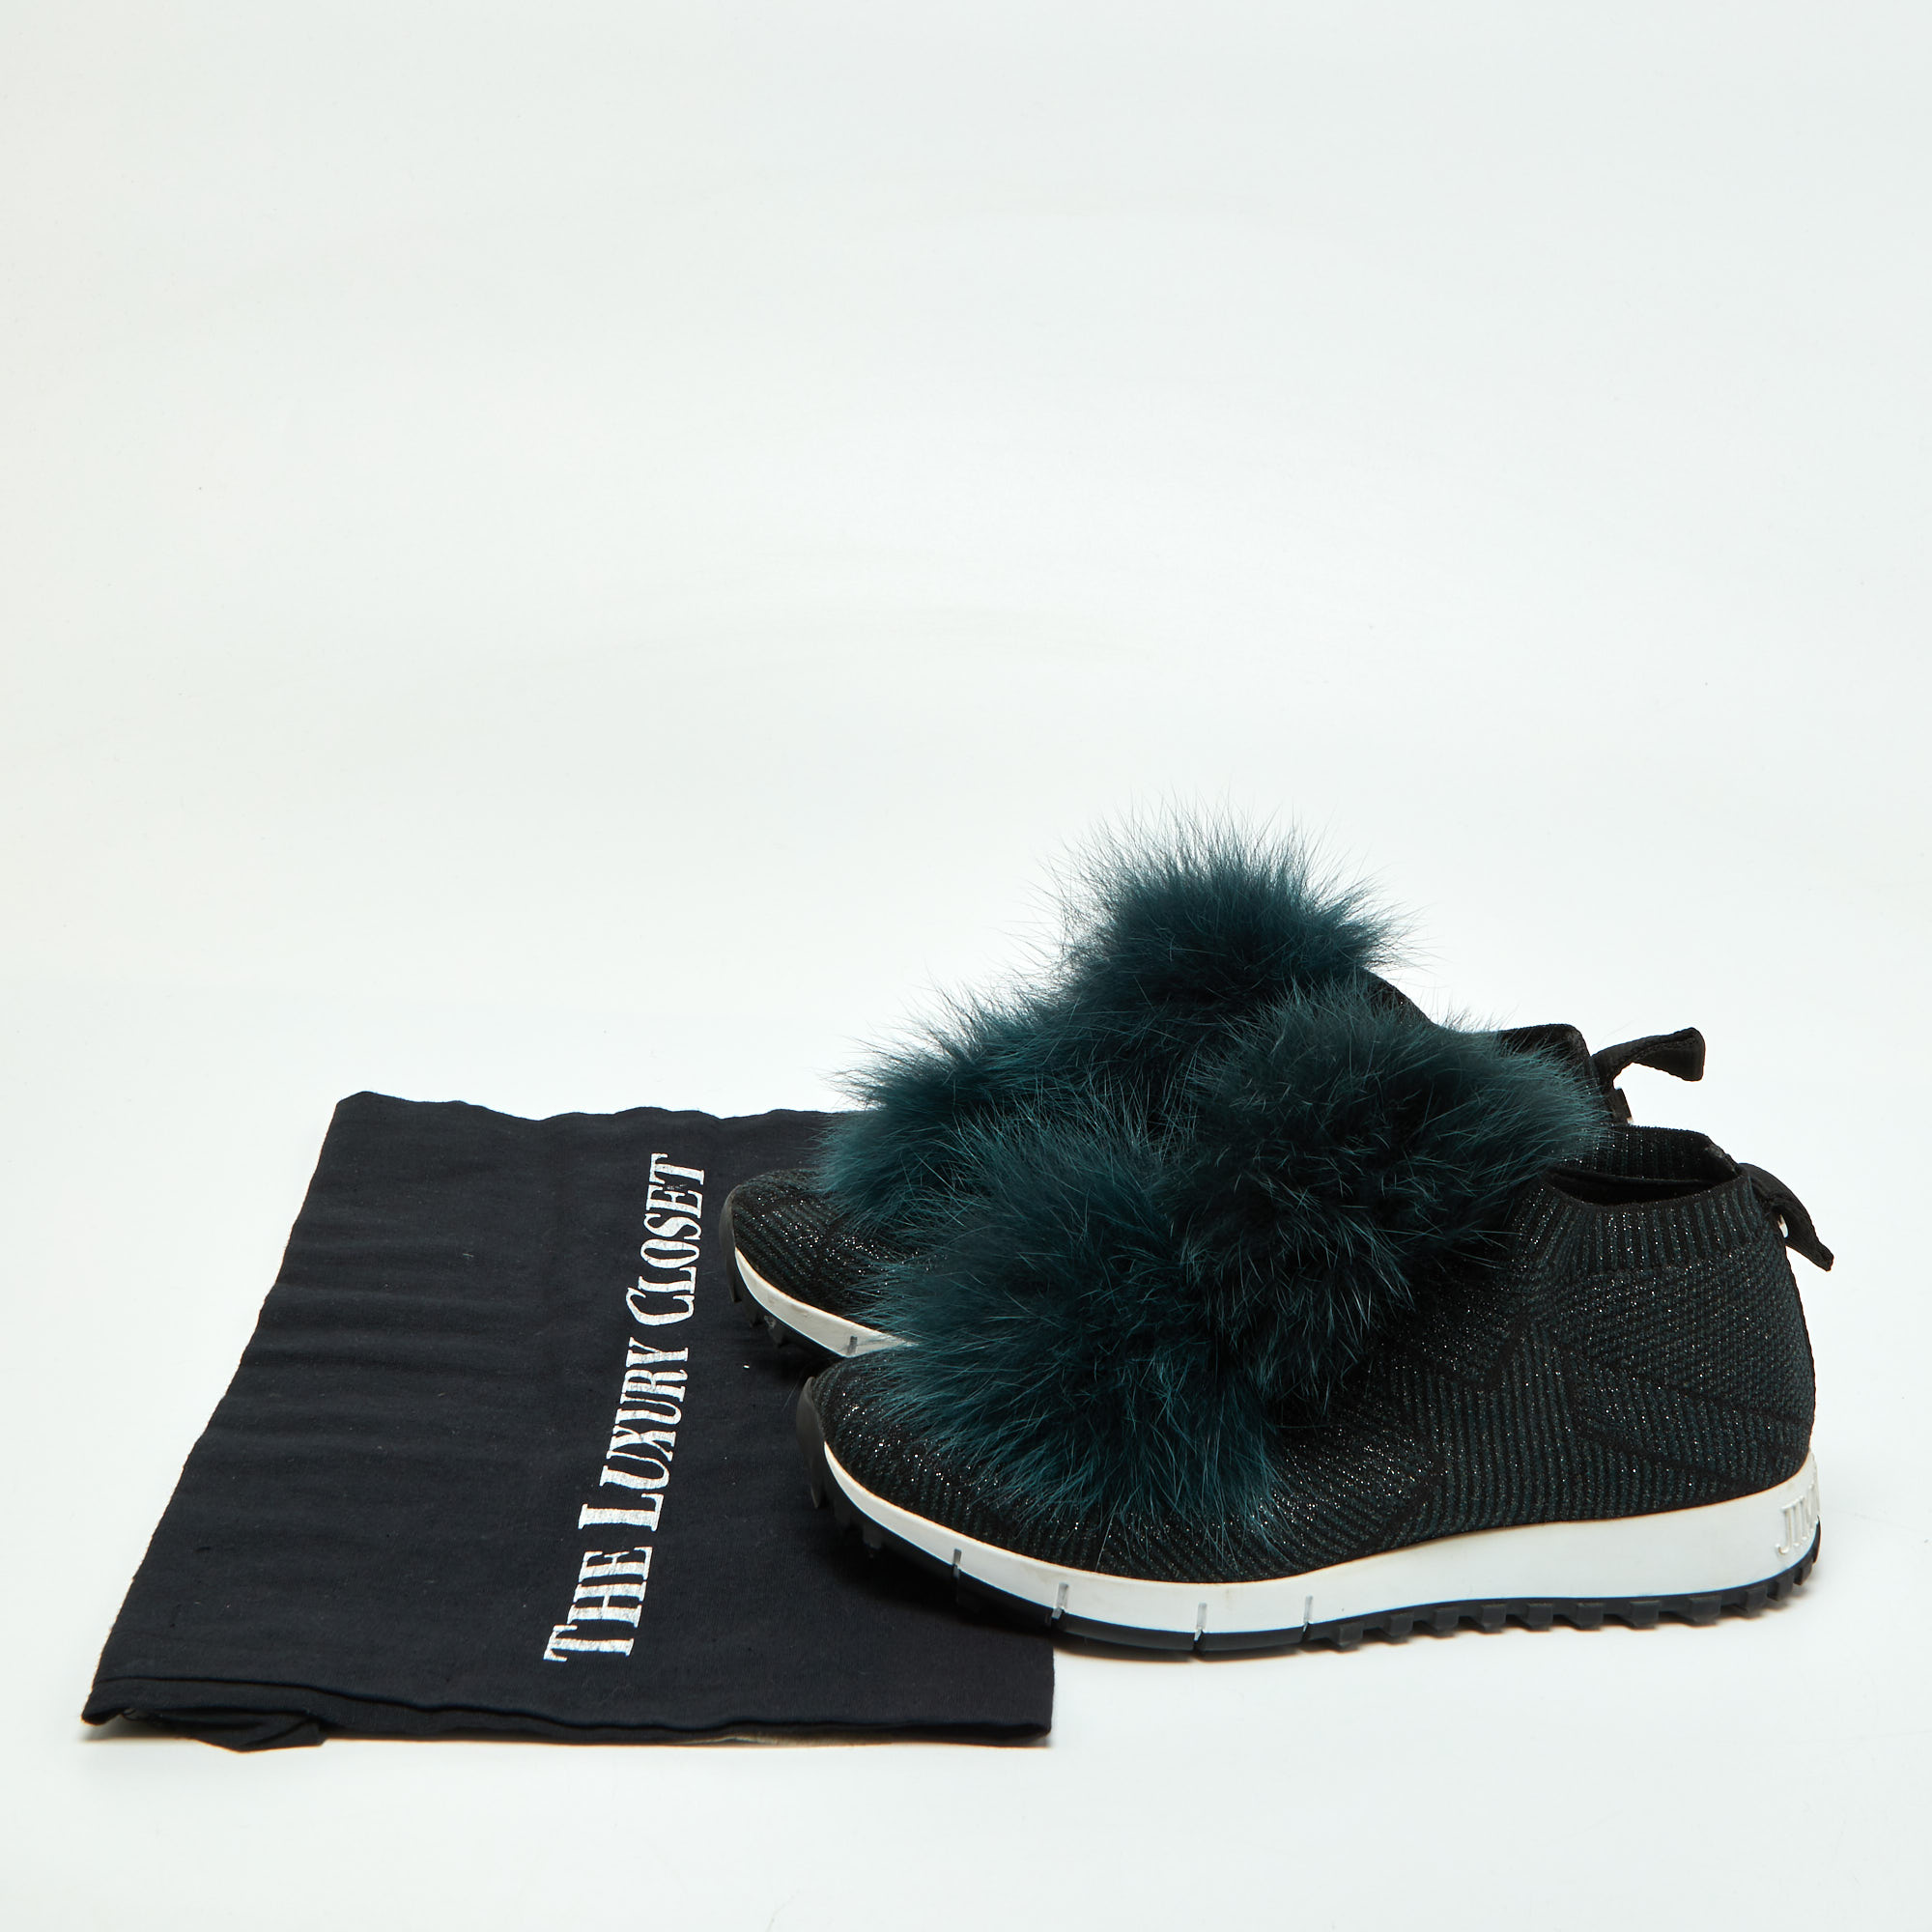 Jimmy Choo Deep Green Knit Fabric And Fur Pom Pom Norway Slip On Sneakers Size 35